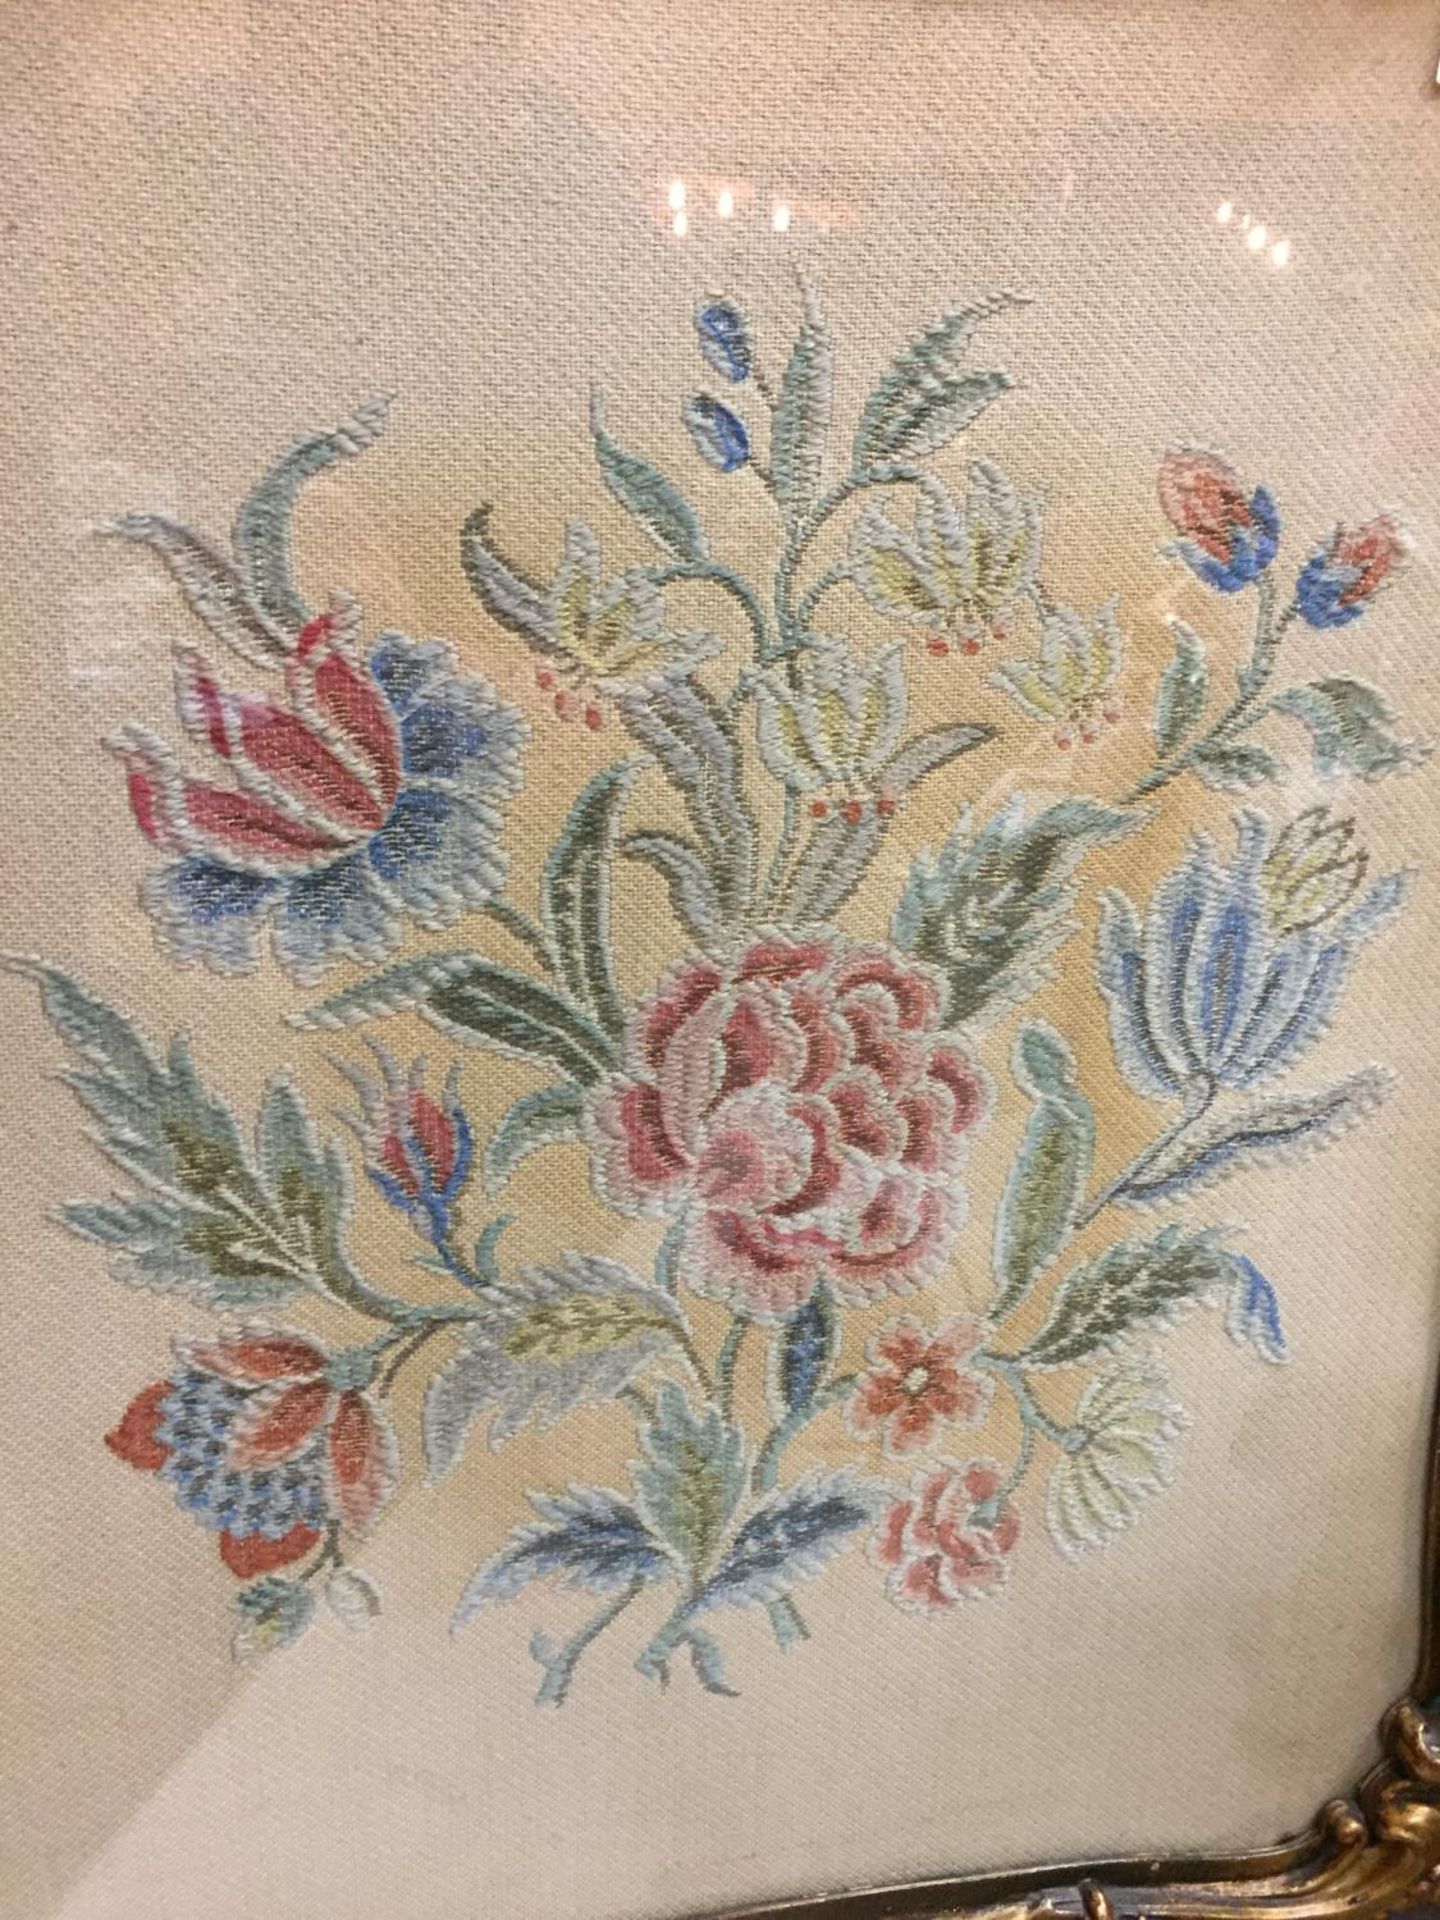 AN ORNATELY FRAMED CROSS STITCHED FIRE SCREEN WITH A FLOWER DESIGN - Image 2 of 4